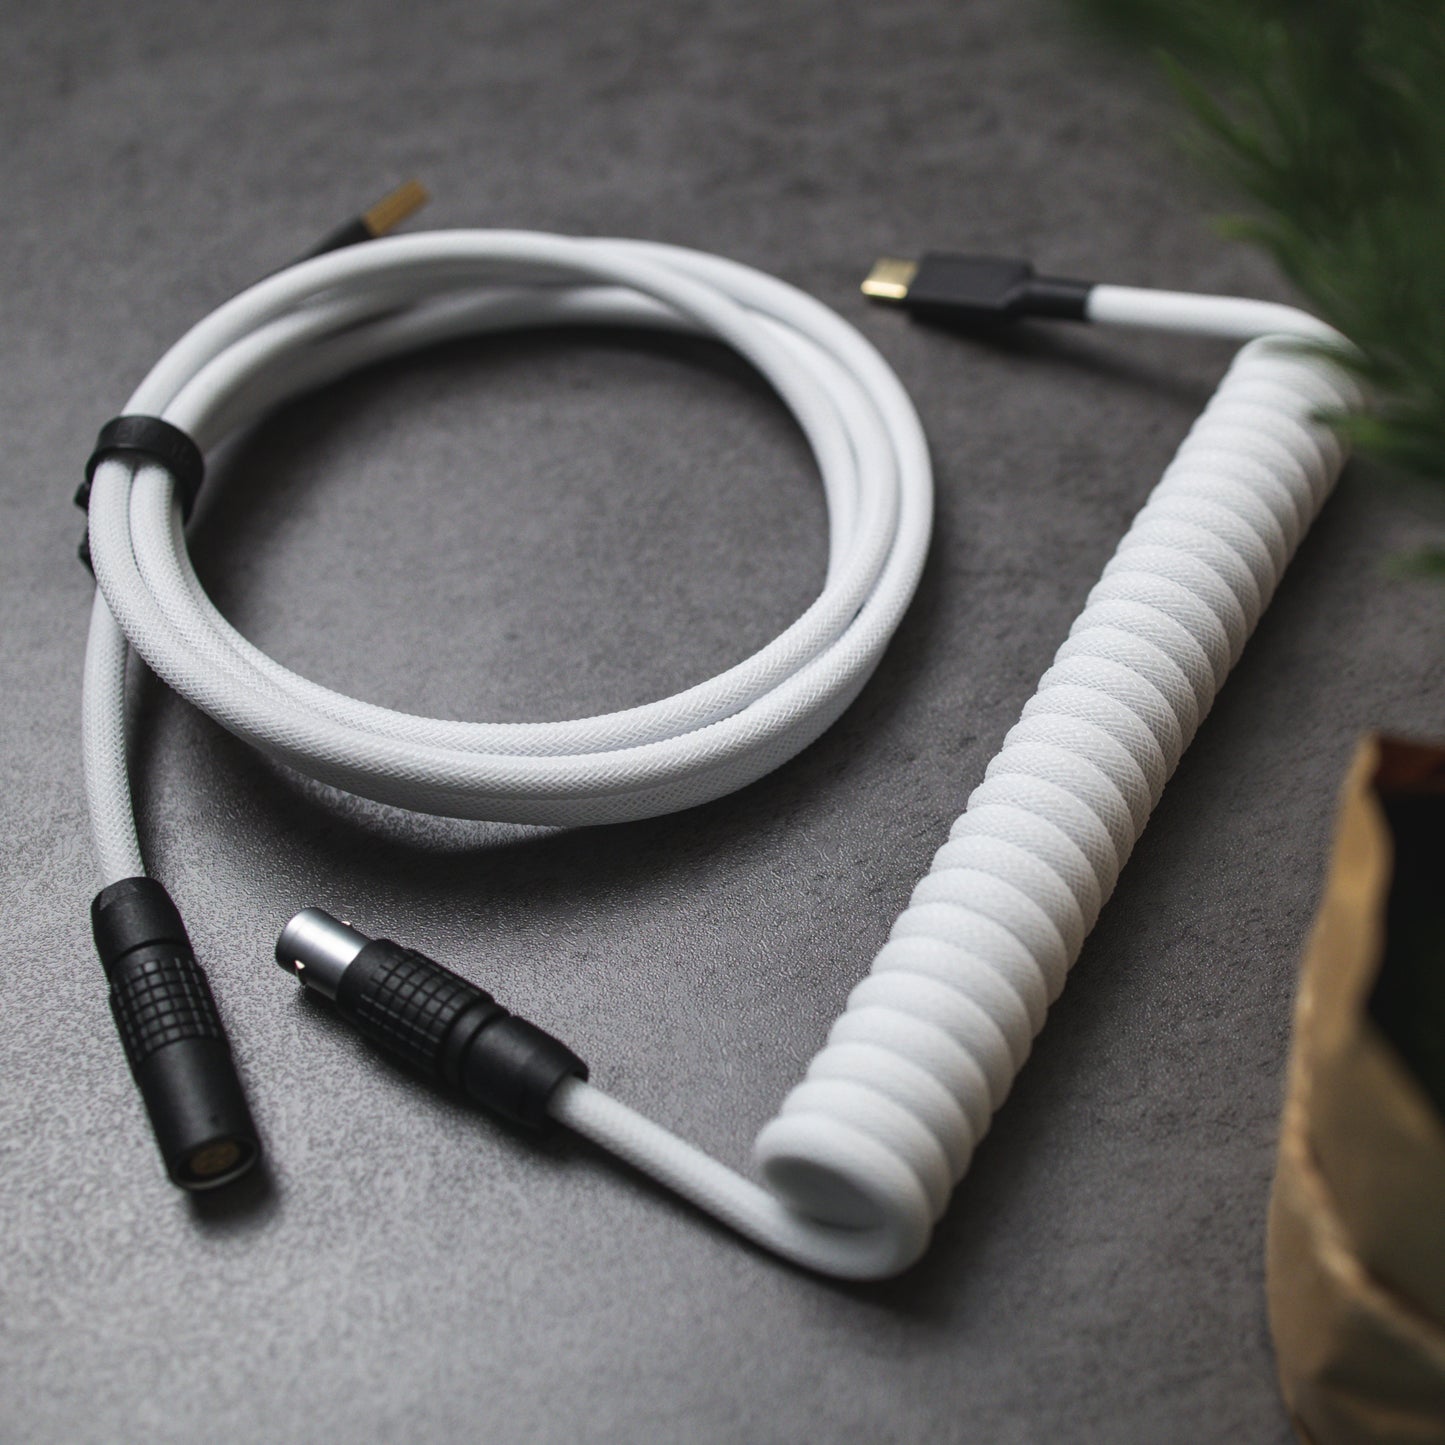 Side view of white and black coiled mechanical keyboard cable. Teleios Polar White sleeving, white TechFlex, black heat-shrink tubing, gold USB A and USB C connectors, black sandblasted FEMO 1B push/pull connector.